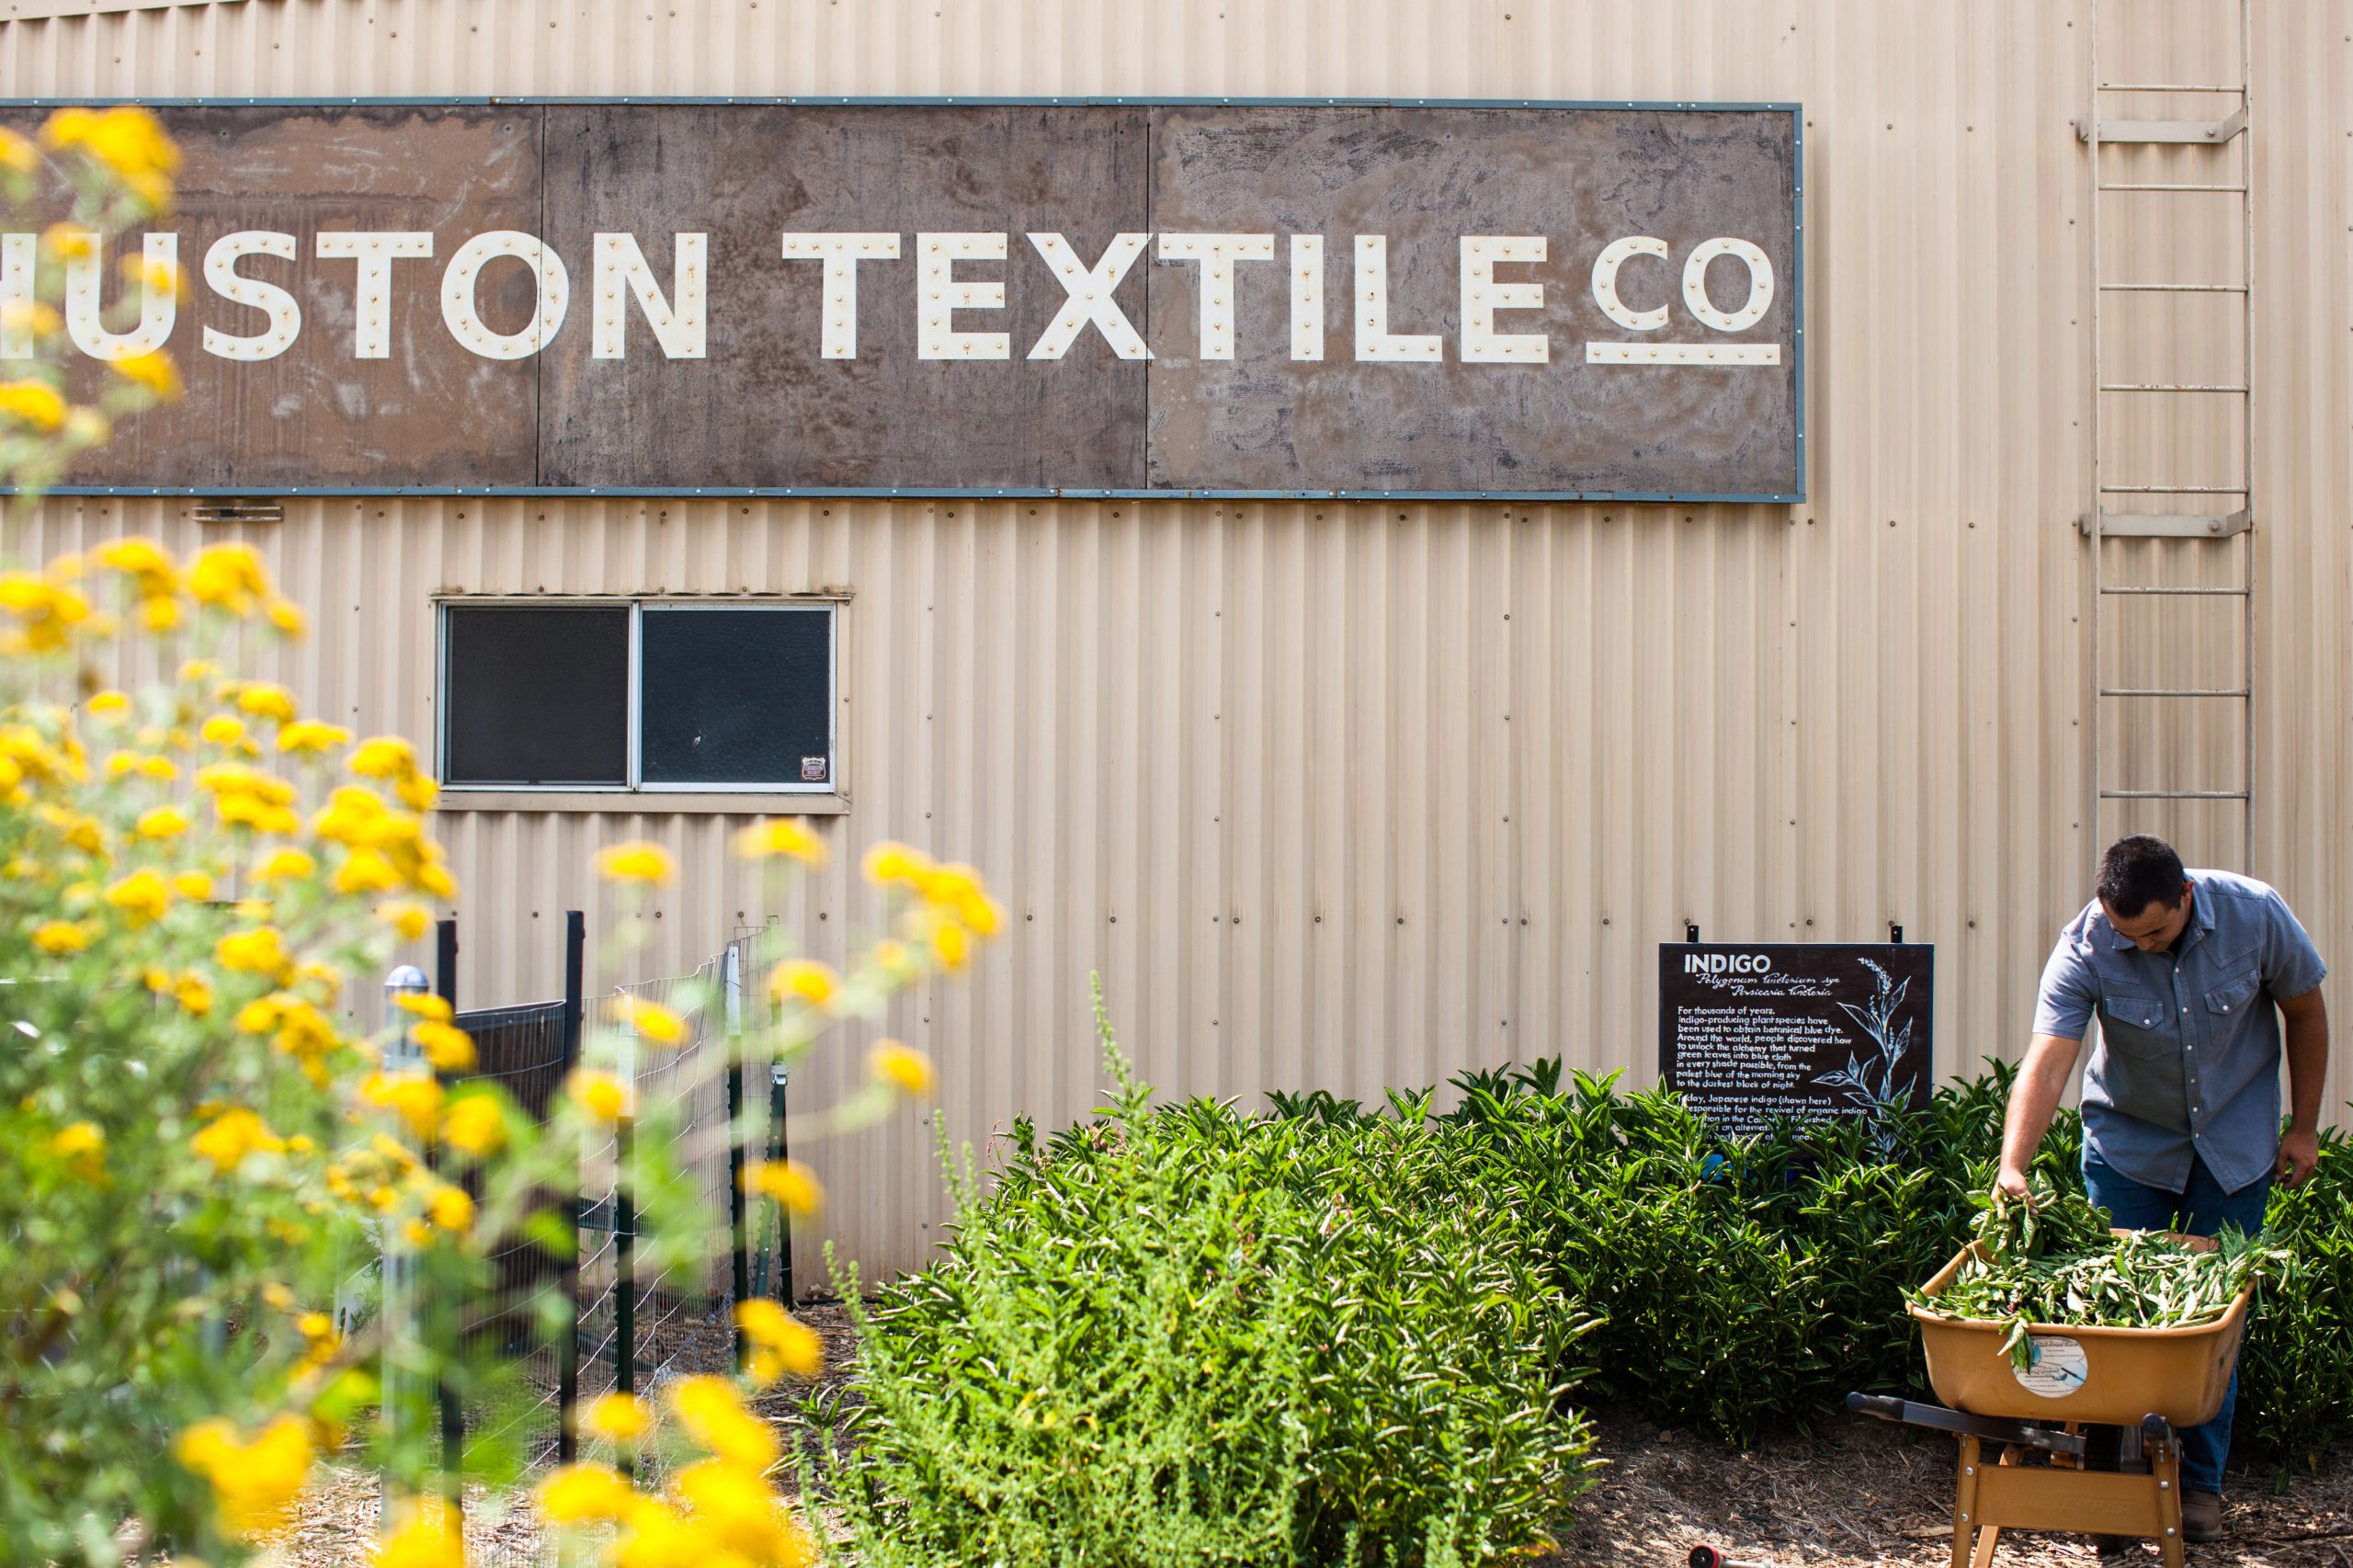 photograph of outside of huston textile company with brown sign and garden with worker